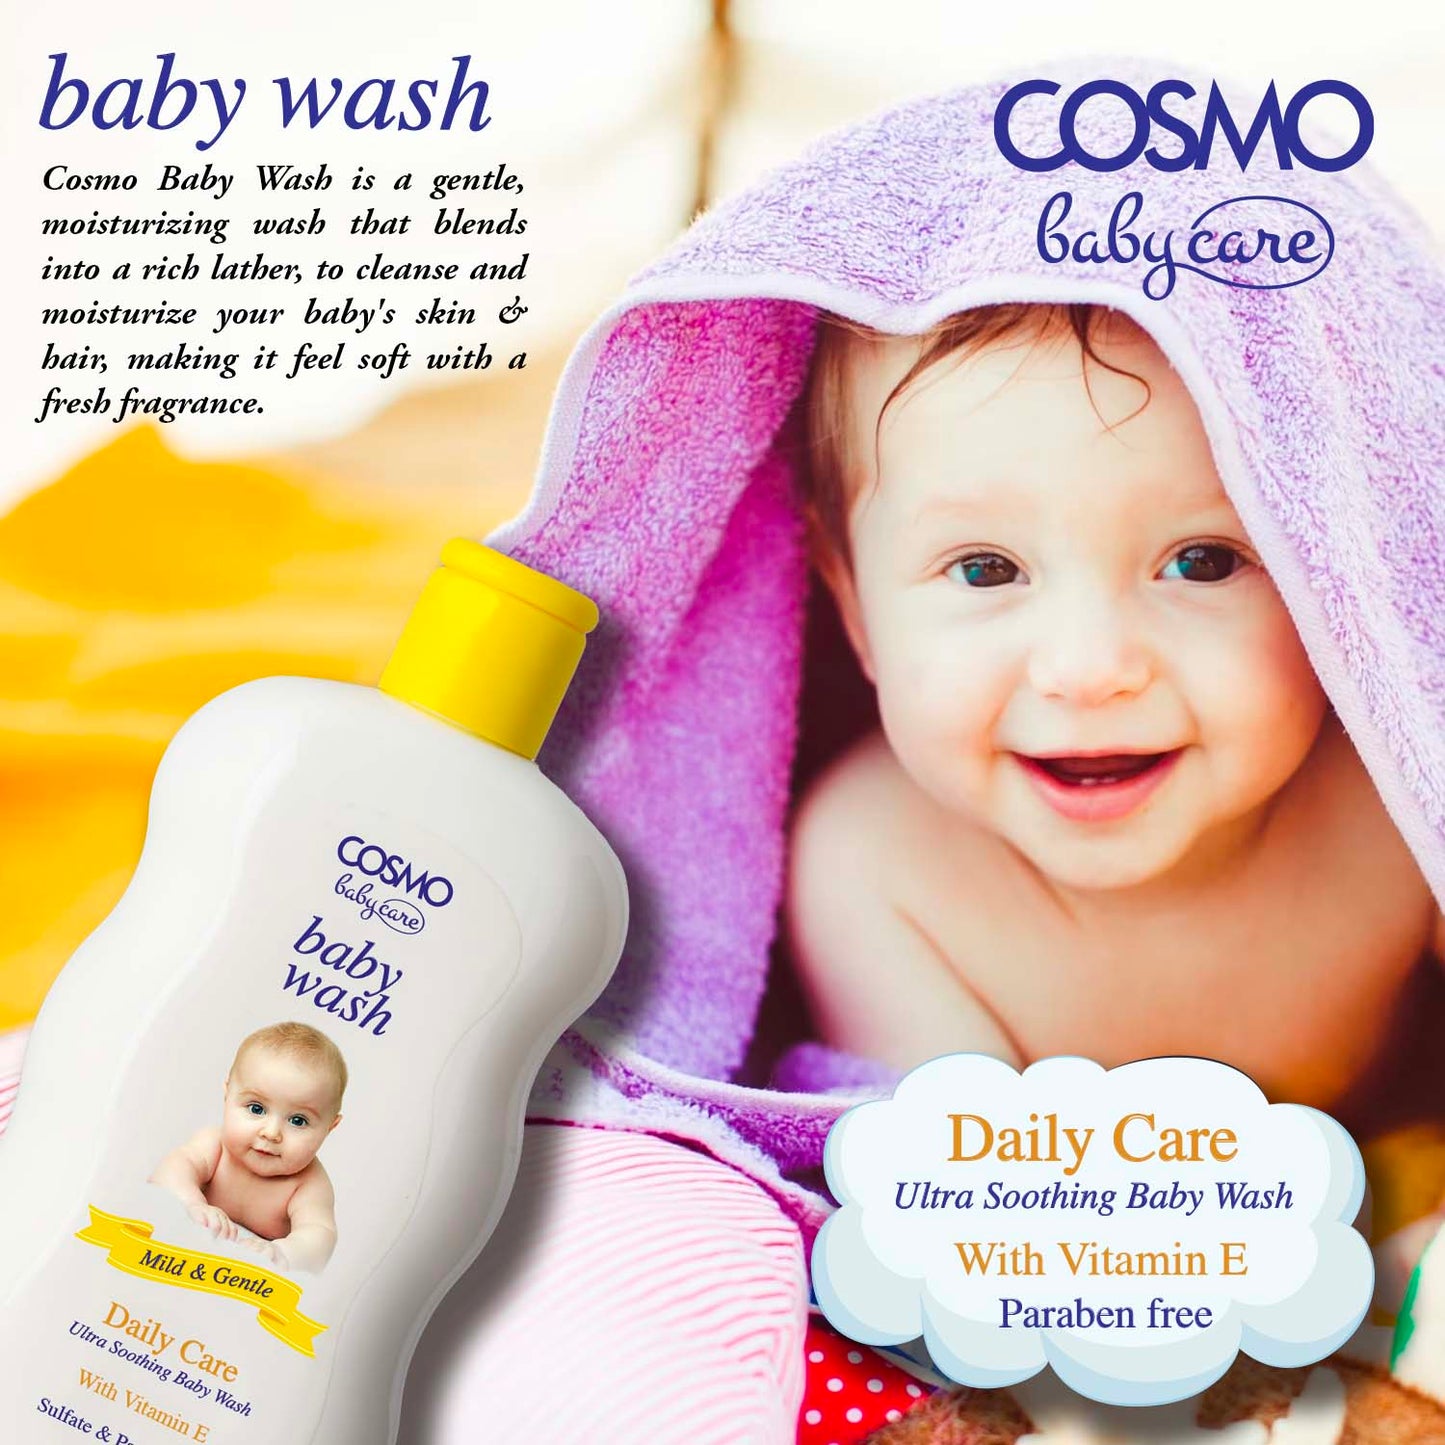 DAILY CARE ULTRA SOOTHING BABY WASH